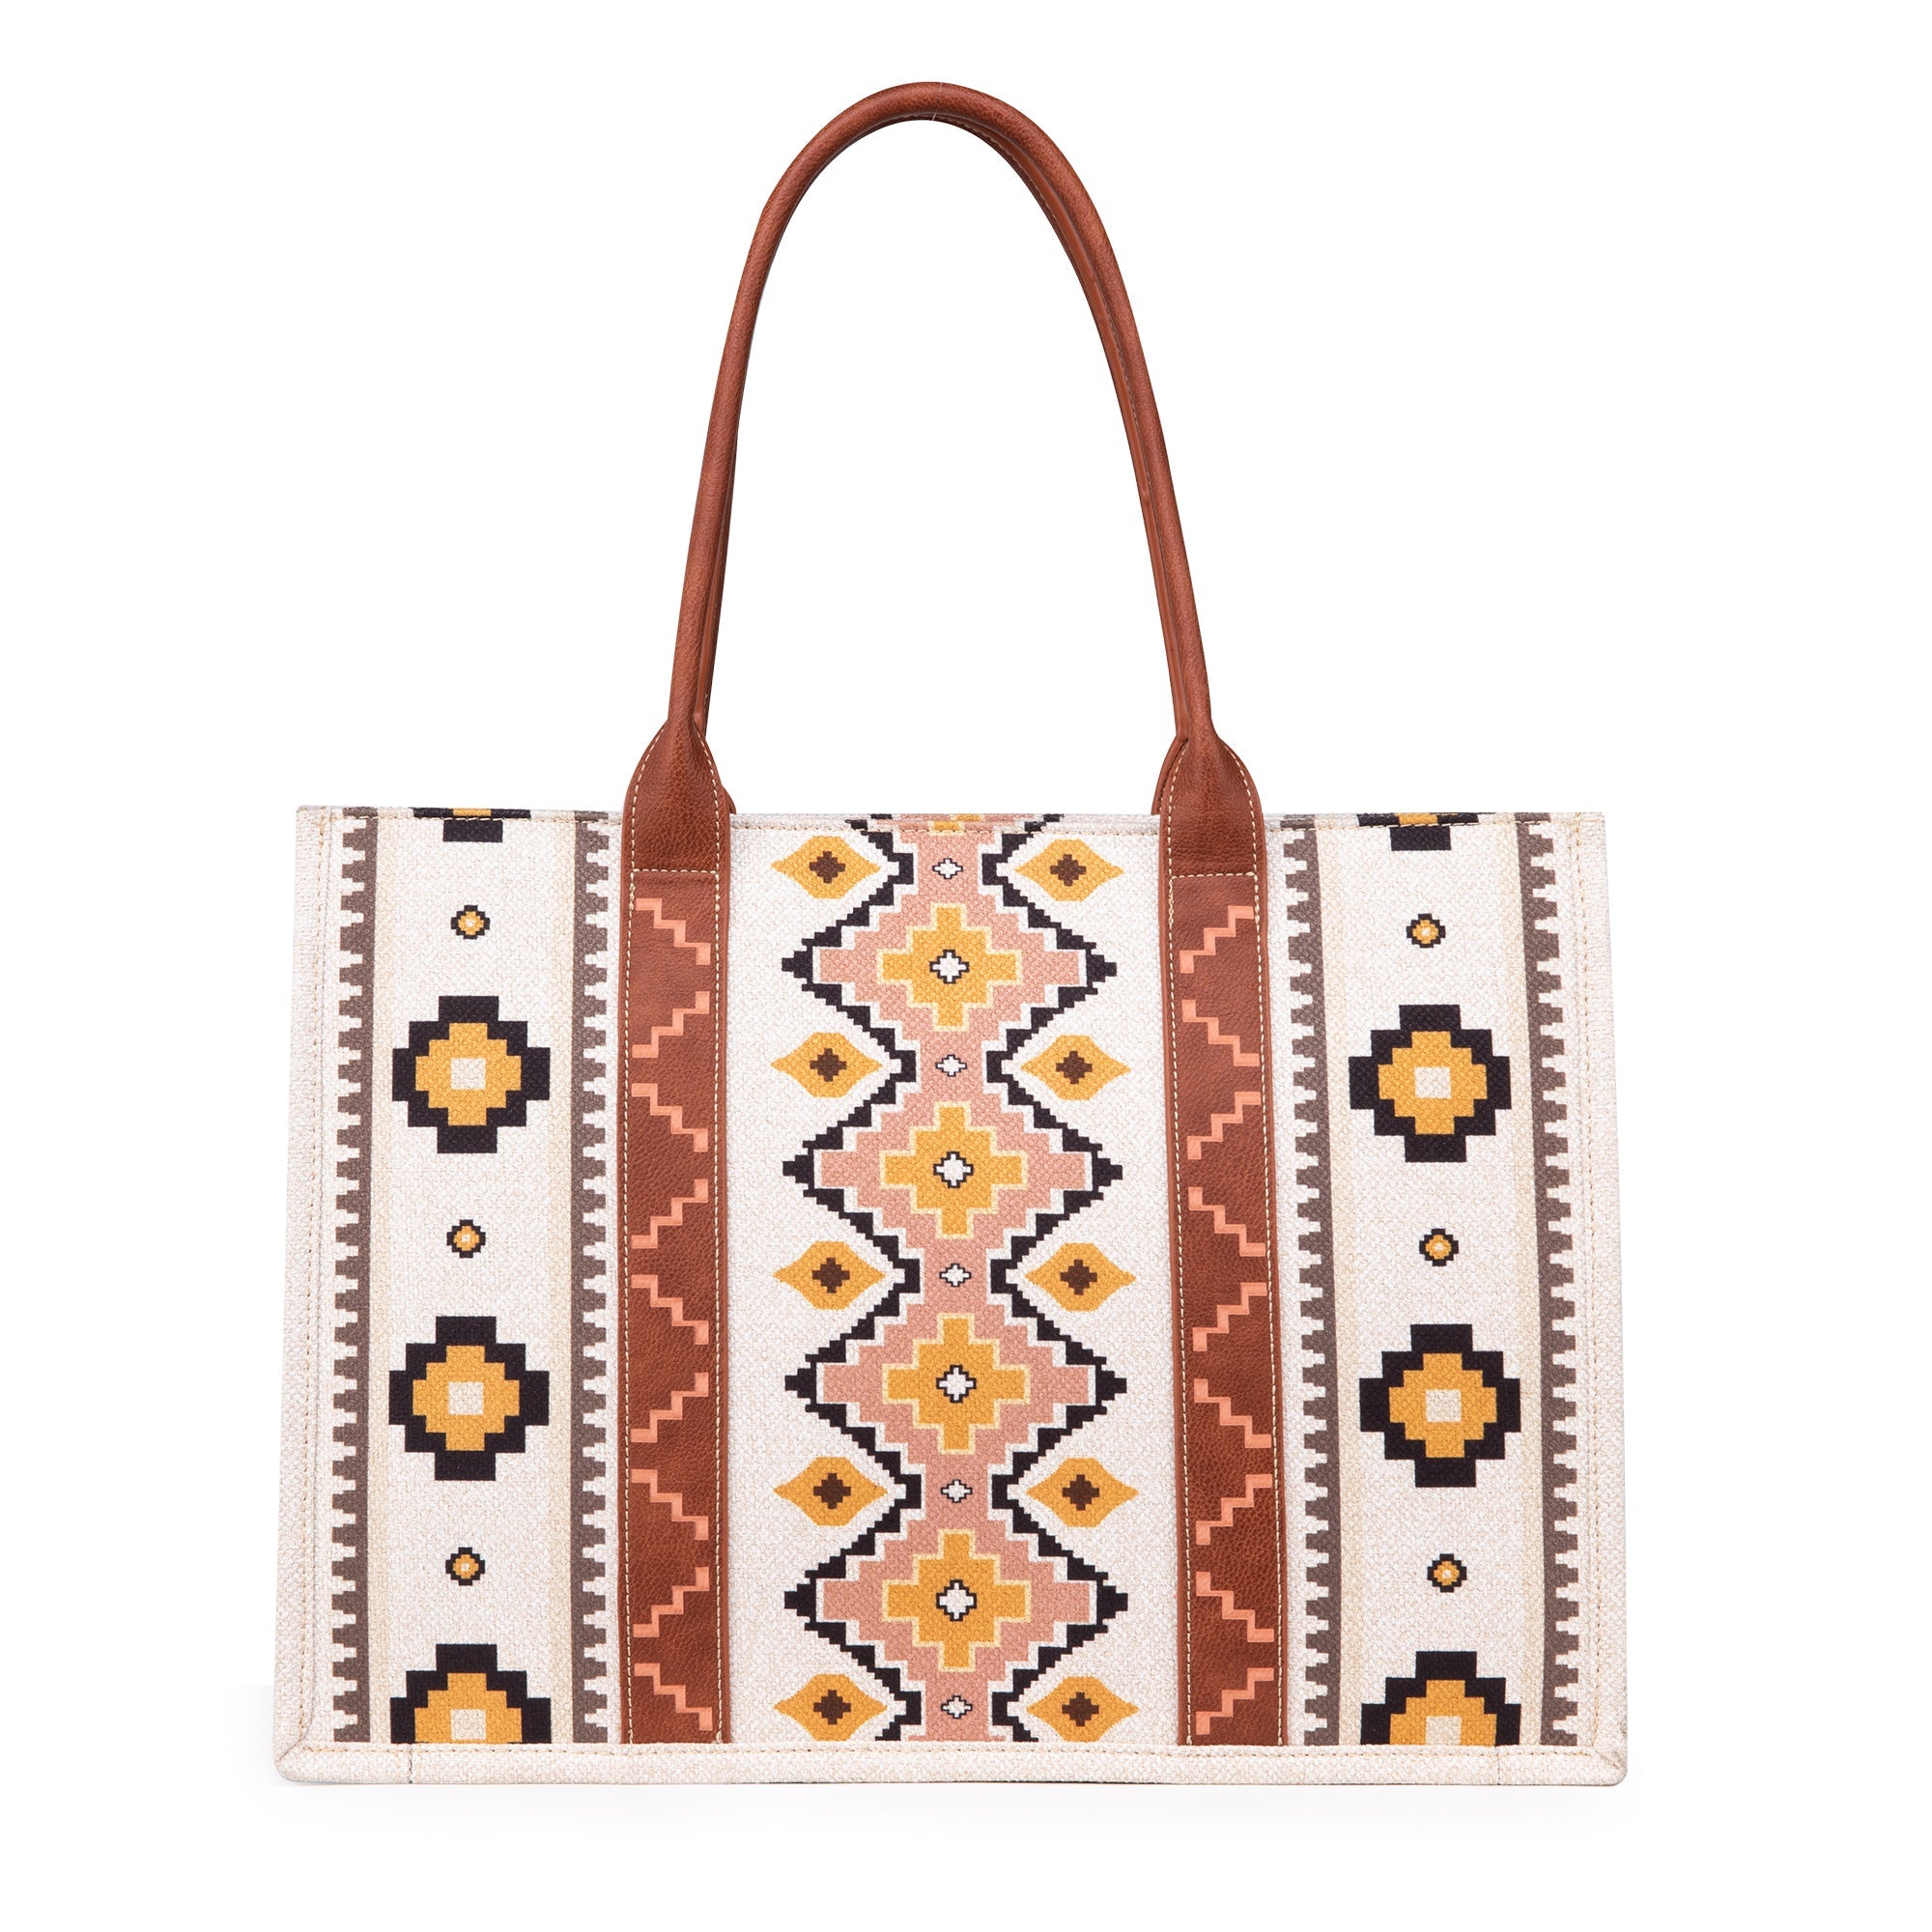 Buckin Bronc Wrangler Tote Crossbody (PREORDER - SHIPS IN 1-2 WEEKS) – The  Crooked Cactus Boutique